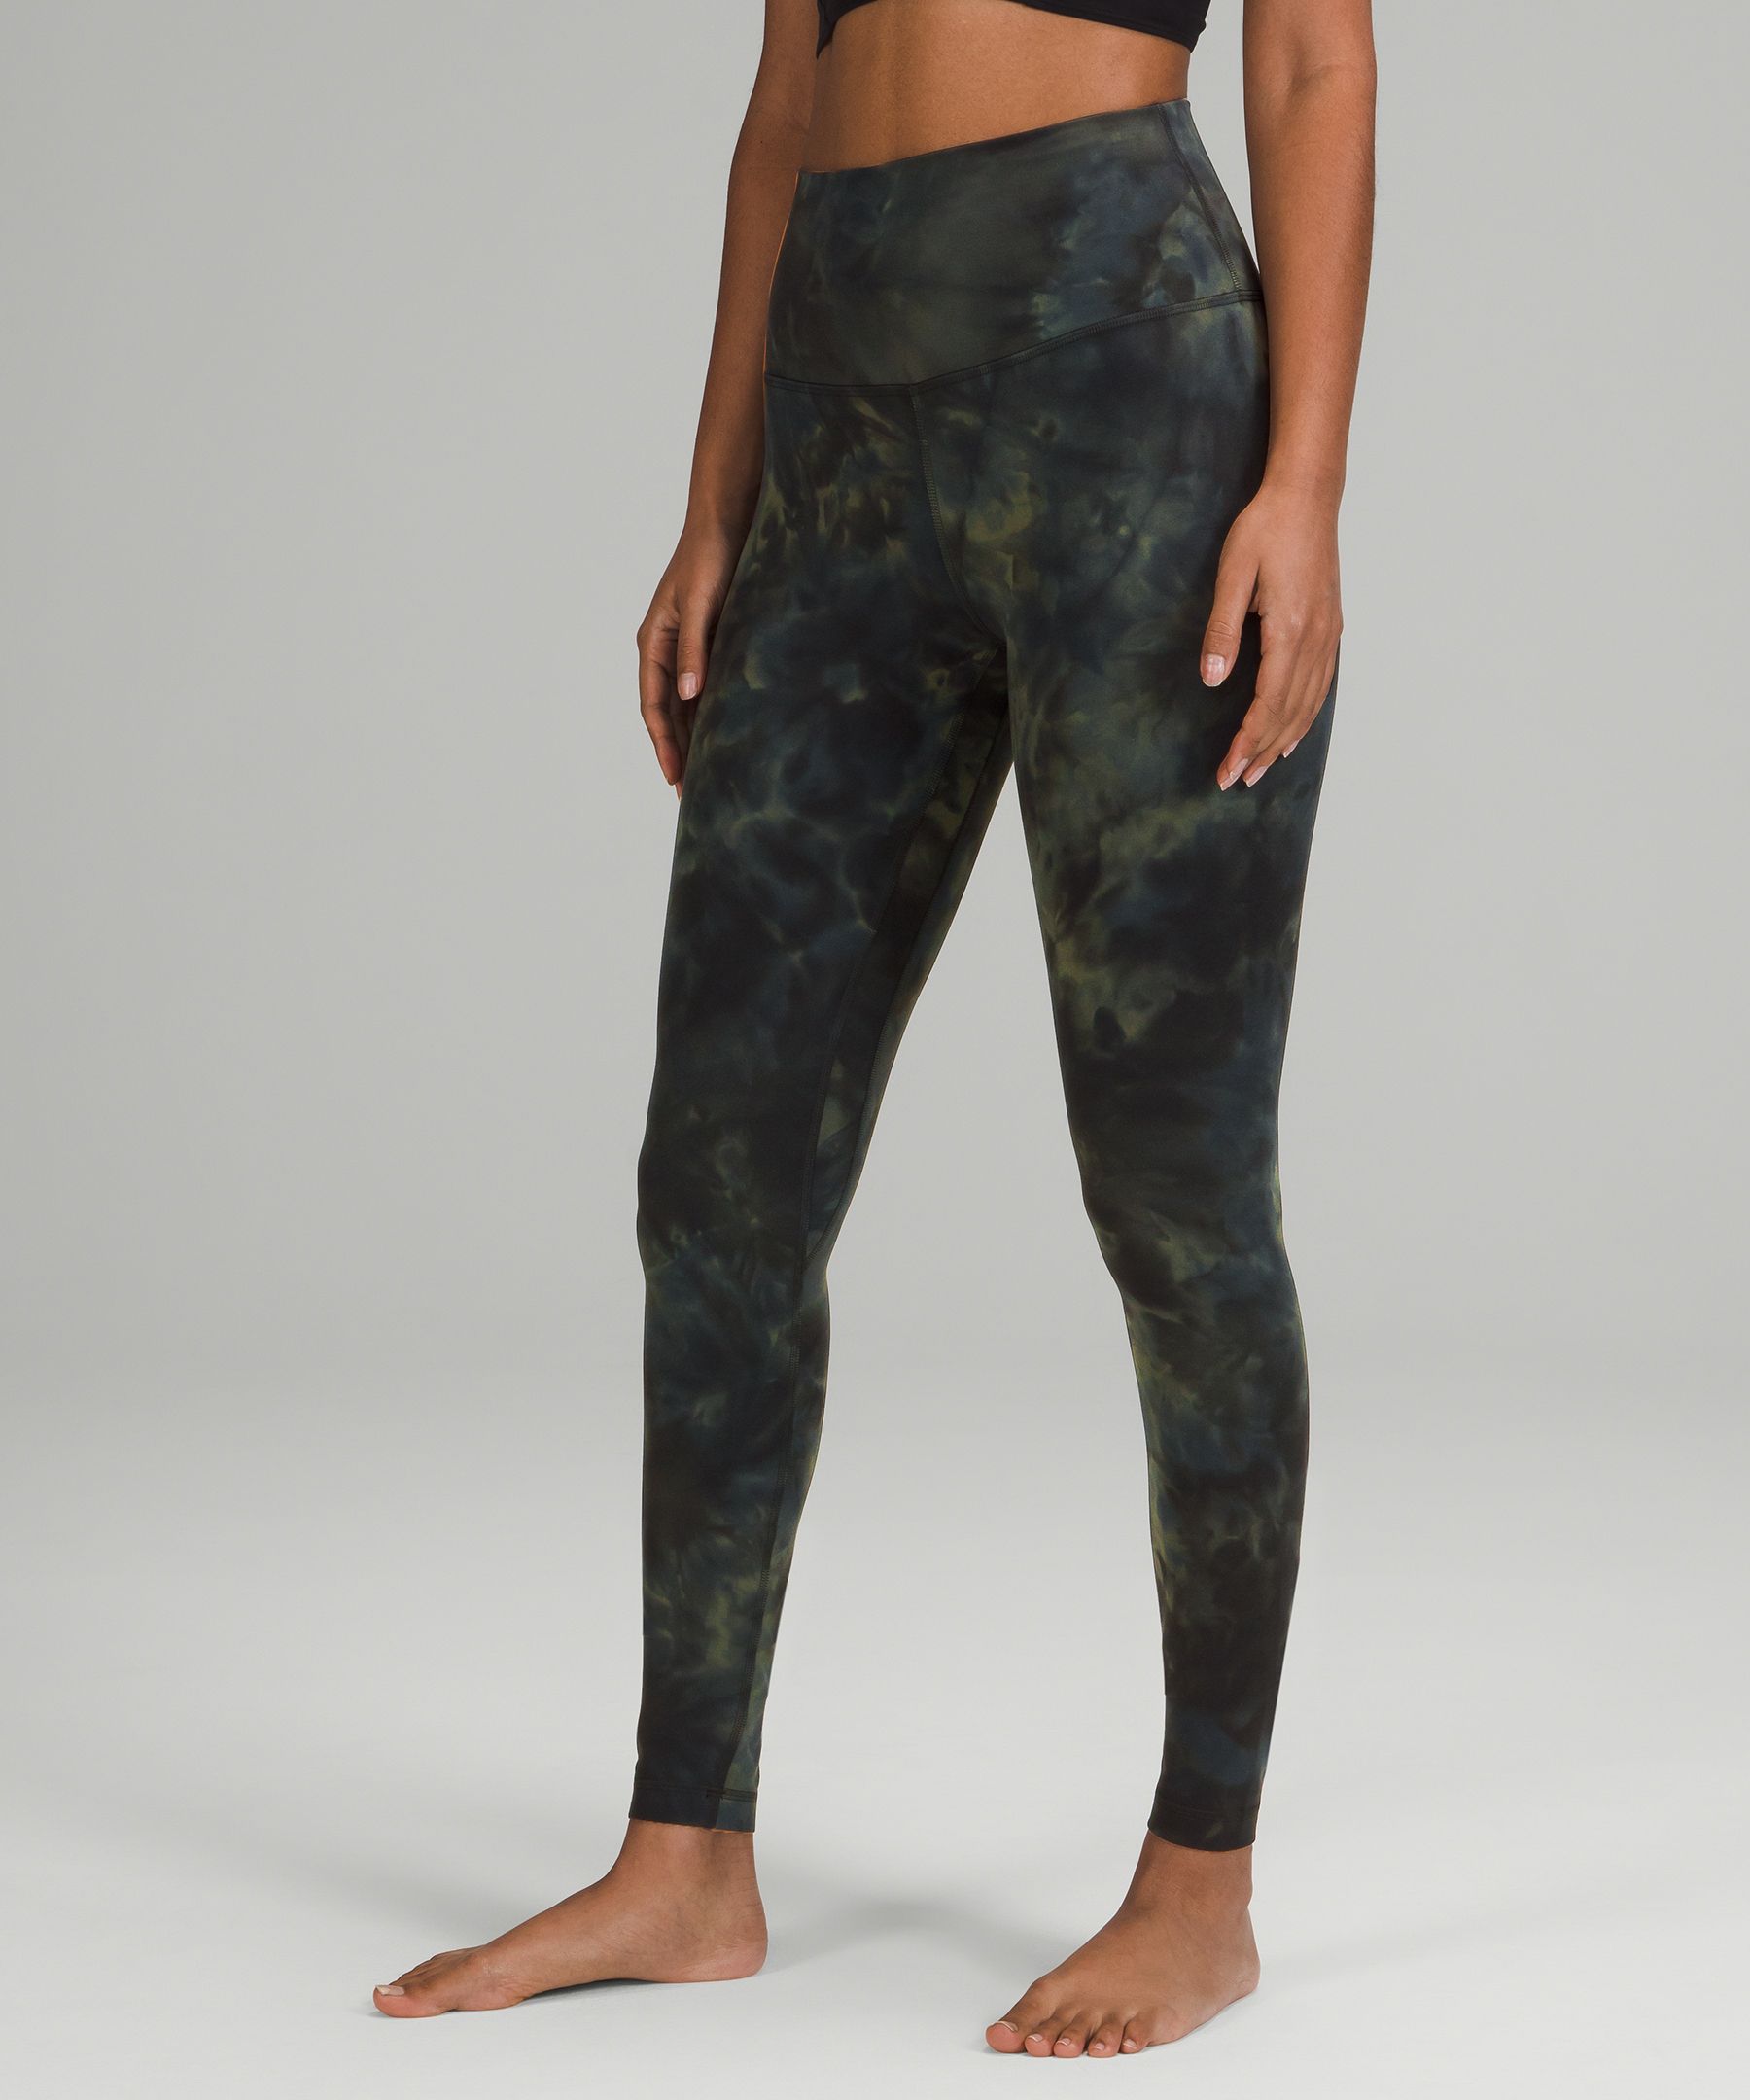 Lululemon Leggings 28” Blue Size 4 - $86 (32% Off Retail) New With Tags -  From evangelin